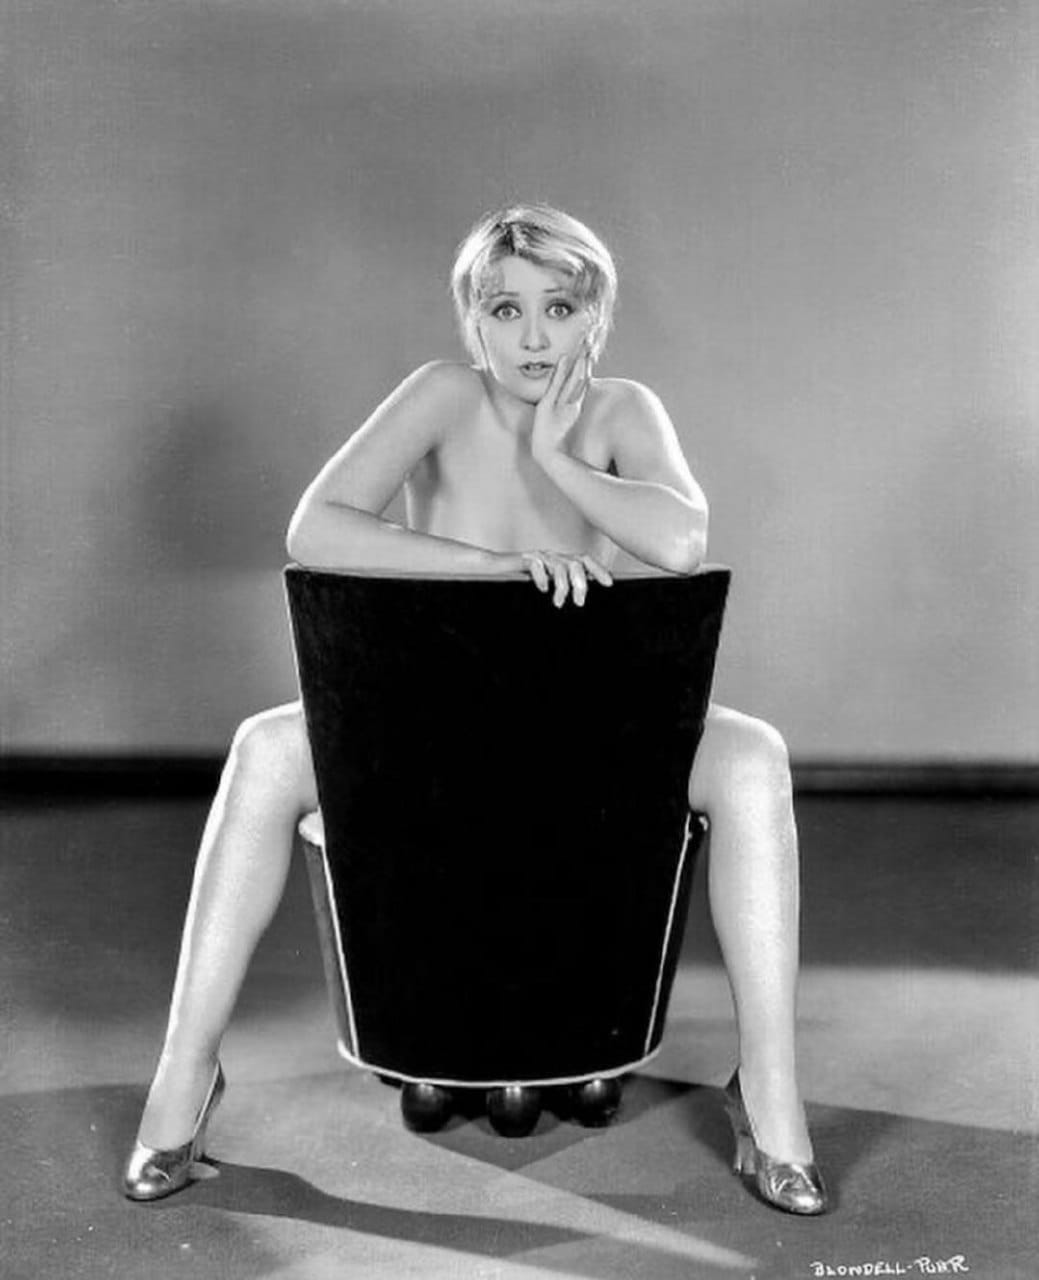 This photo of Joan Blondell from 1932 was banned for indecency